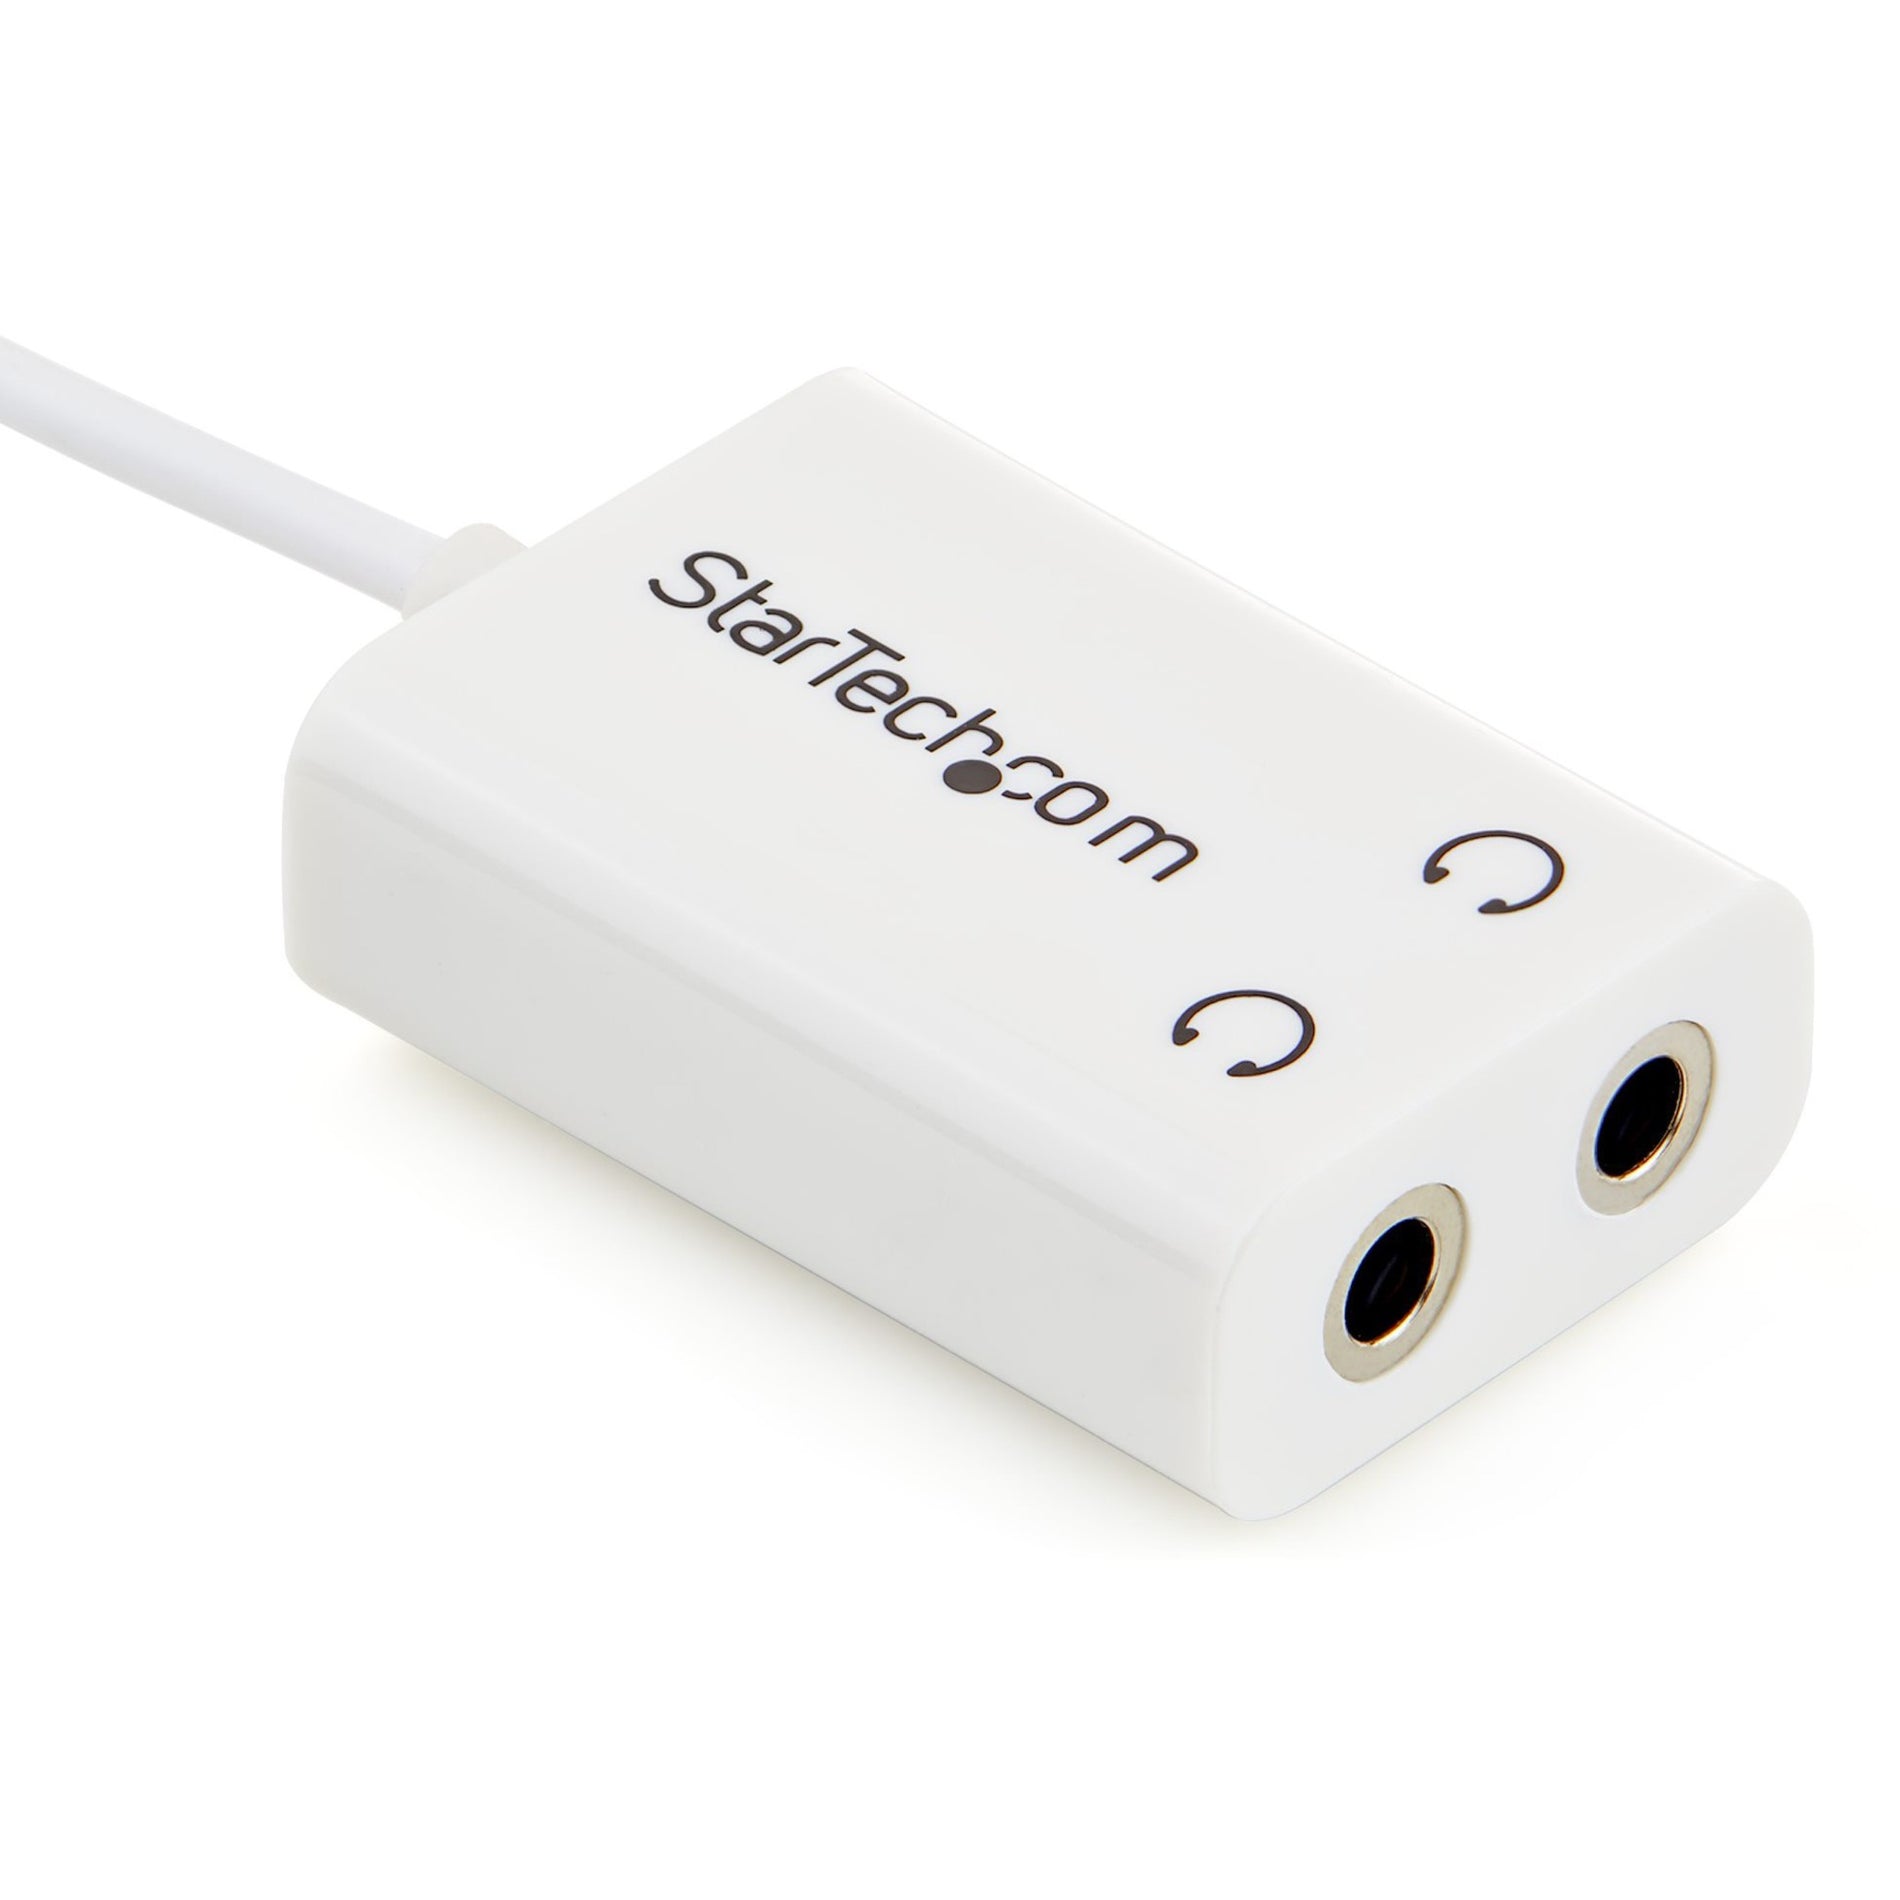 StarTech.com MUY1MFFADPW White Stereo Splitter Adapter - 3.5mm Male to 2x 3.5mm Female, Molded, 6" Cable Length